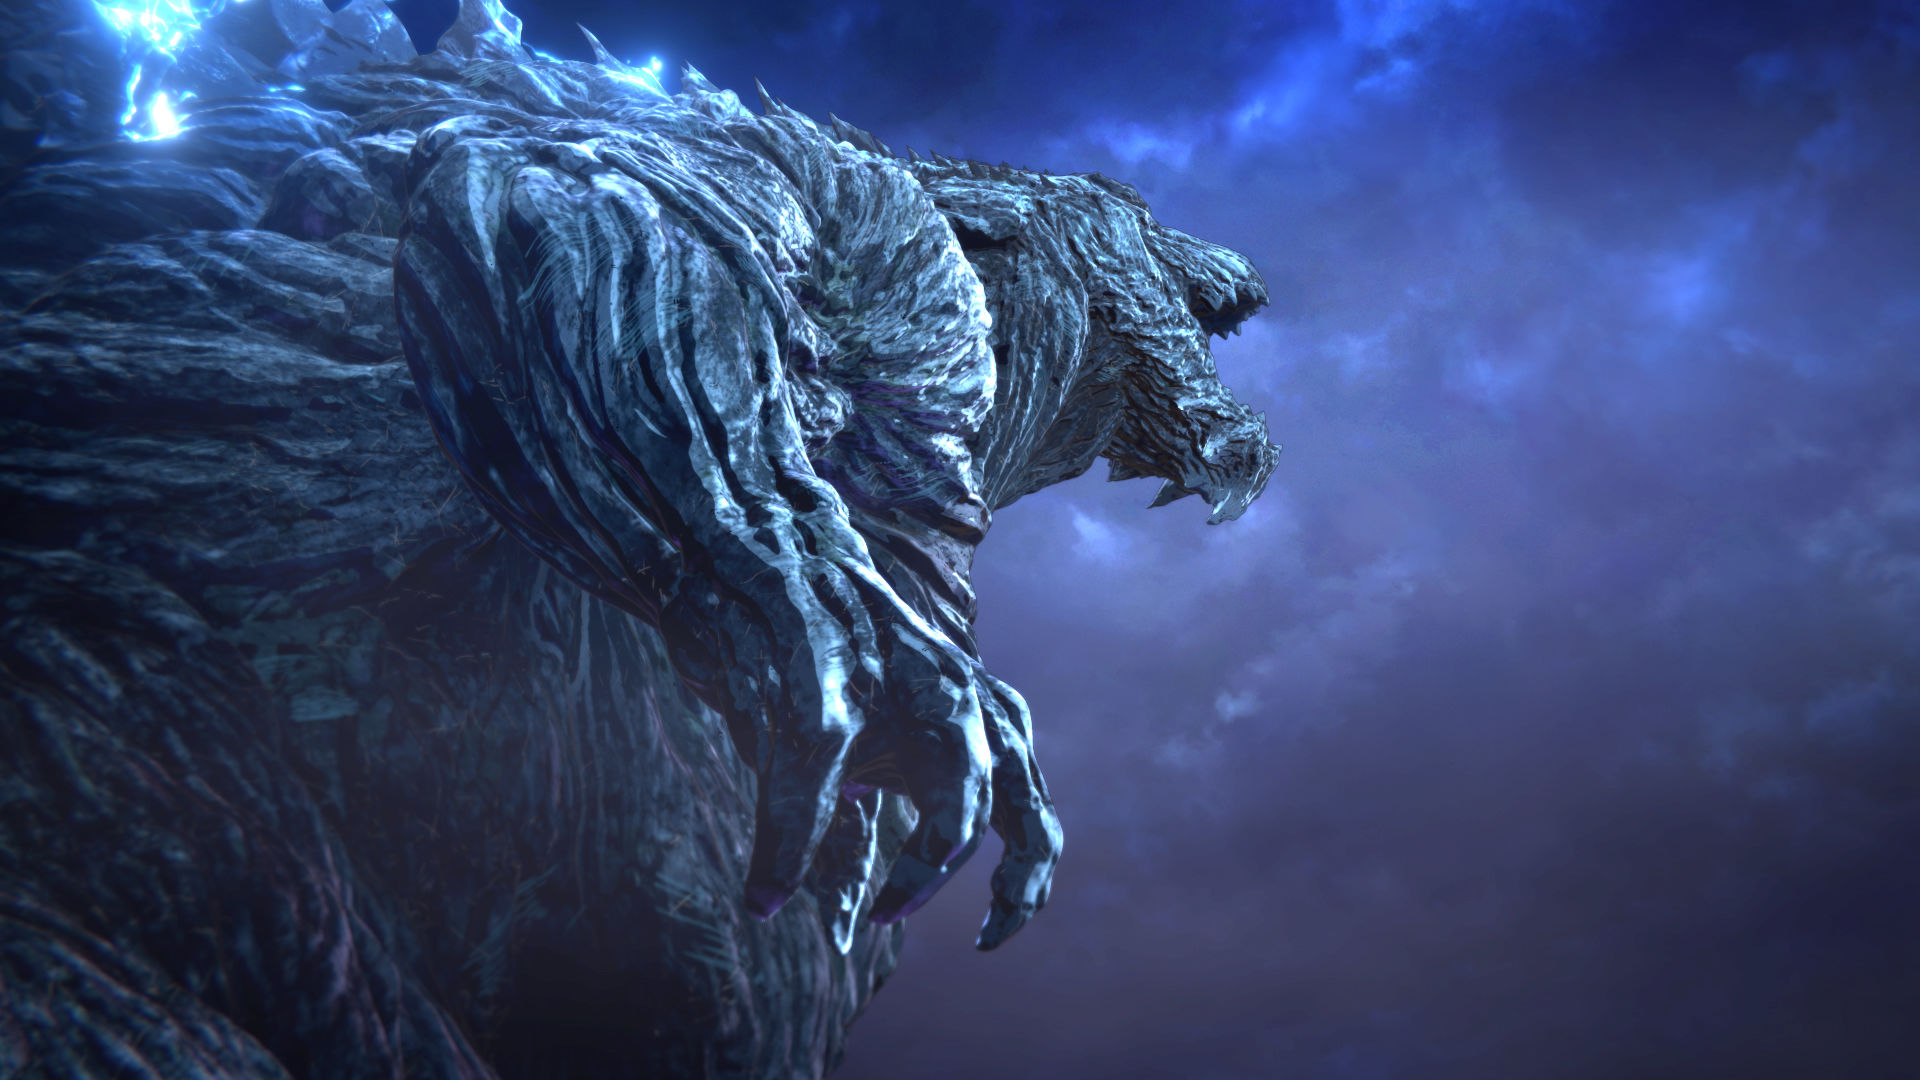 Netflixs Godzilla Anime Trilogy is an Interesting Disappointing Extension  of the Kaijū Mythos Review  Opus